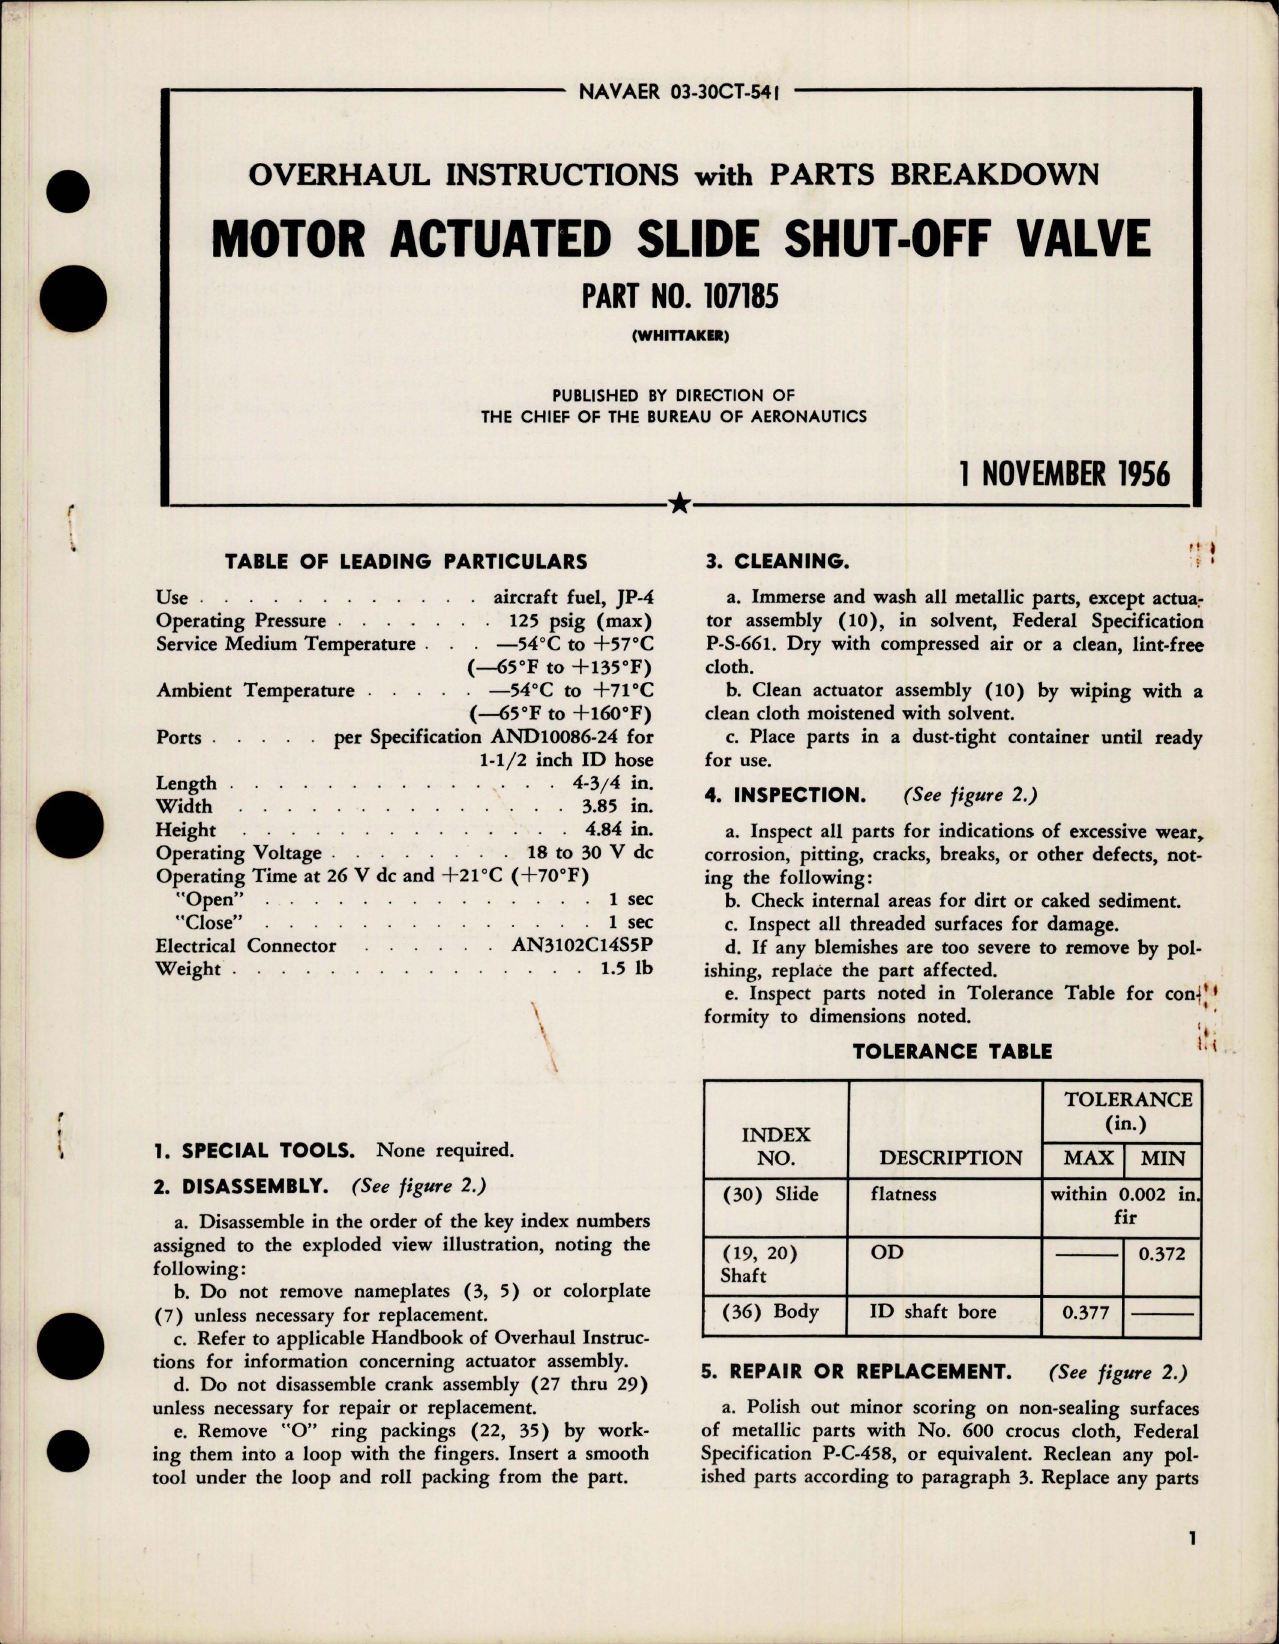 Sample page 1 from AirCorps Library document: Overhaul Instructions with Parts for Motor Actuated Slide Shut-Off Valve - Part 107185 